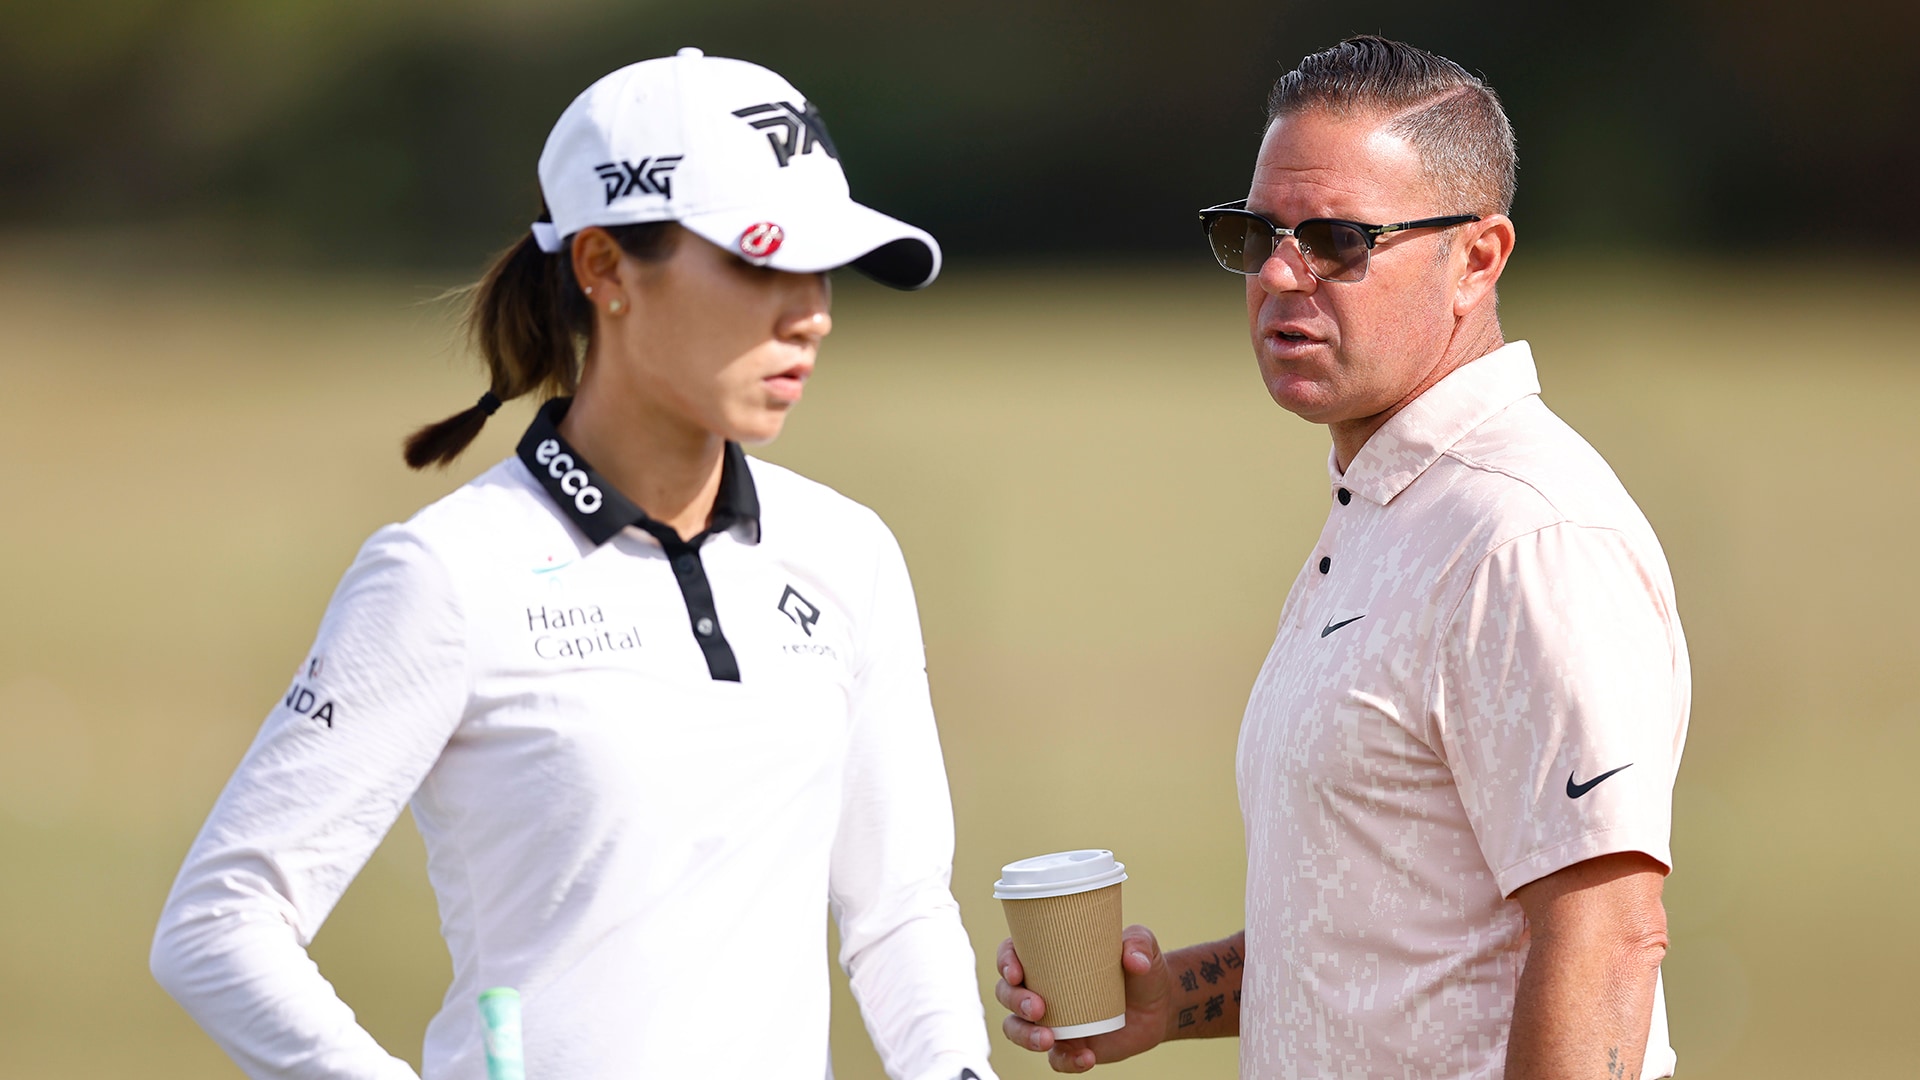 Lydia Ko and instructor Sean Foley parted ways last month, world No. 3 says